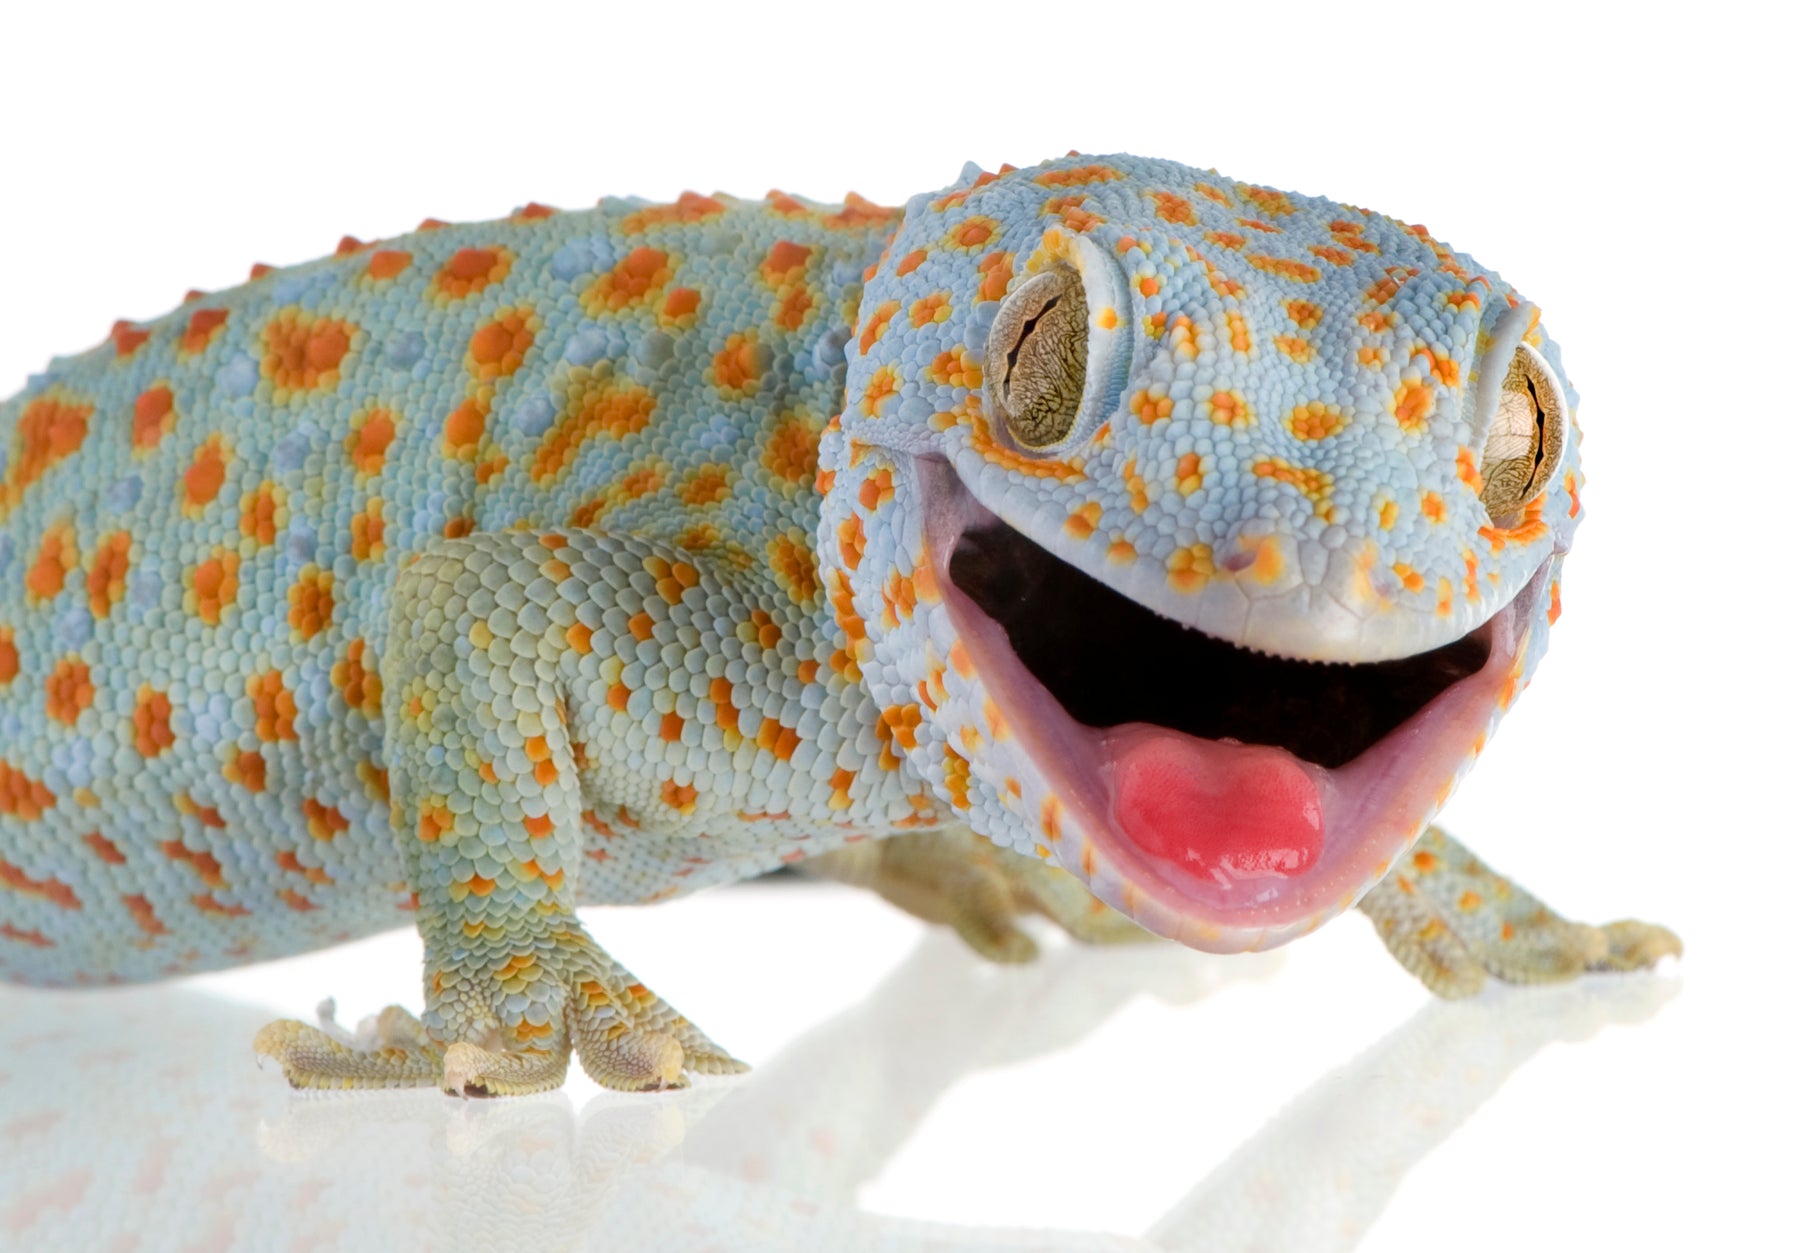 How to Care for Your Tokay Gecko